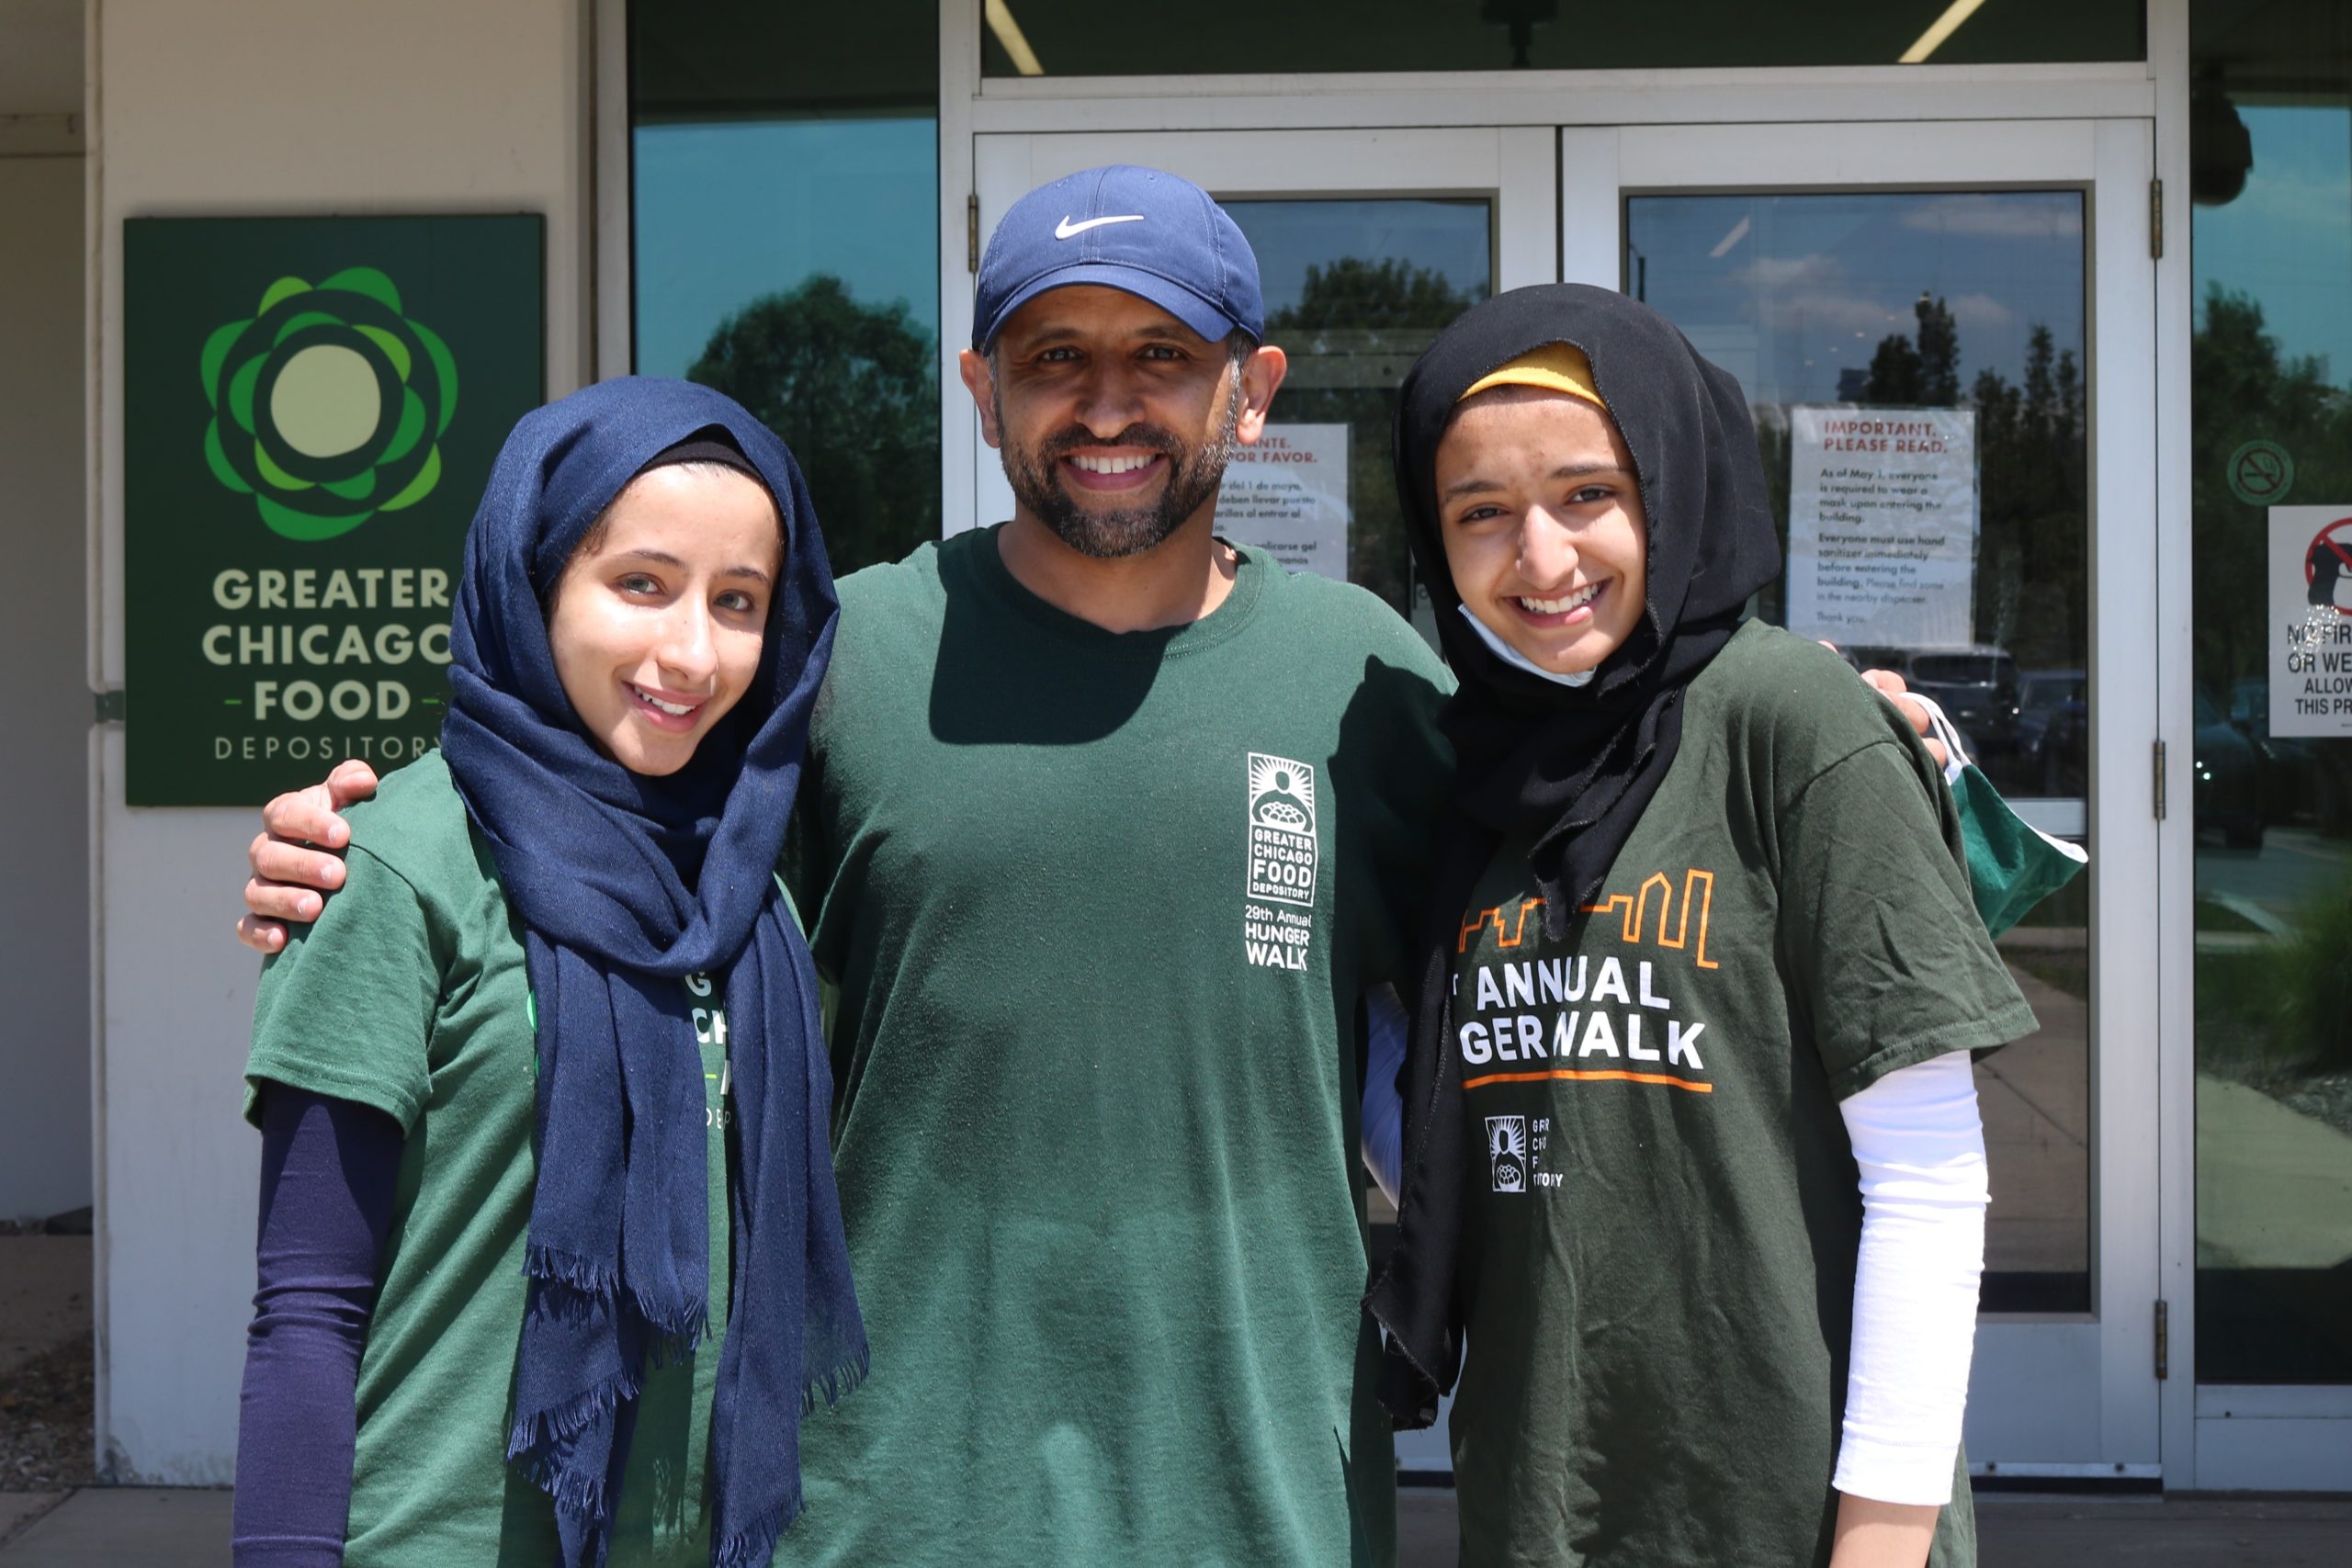 The Nasser family (from left: Mya, Naser, and Dana) at the Food Depository headquarters